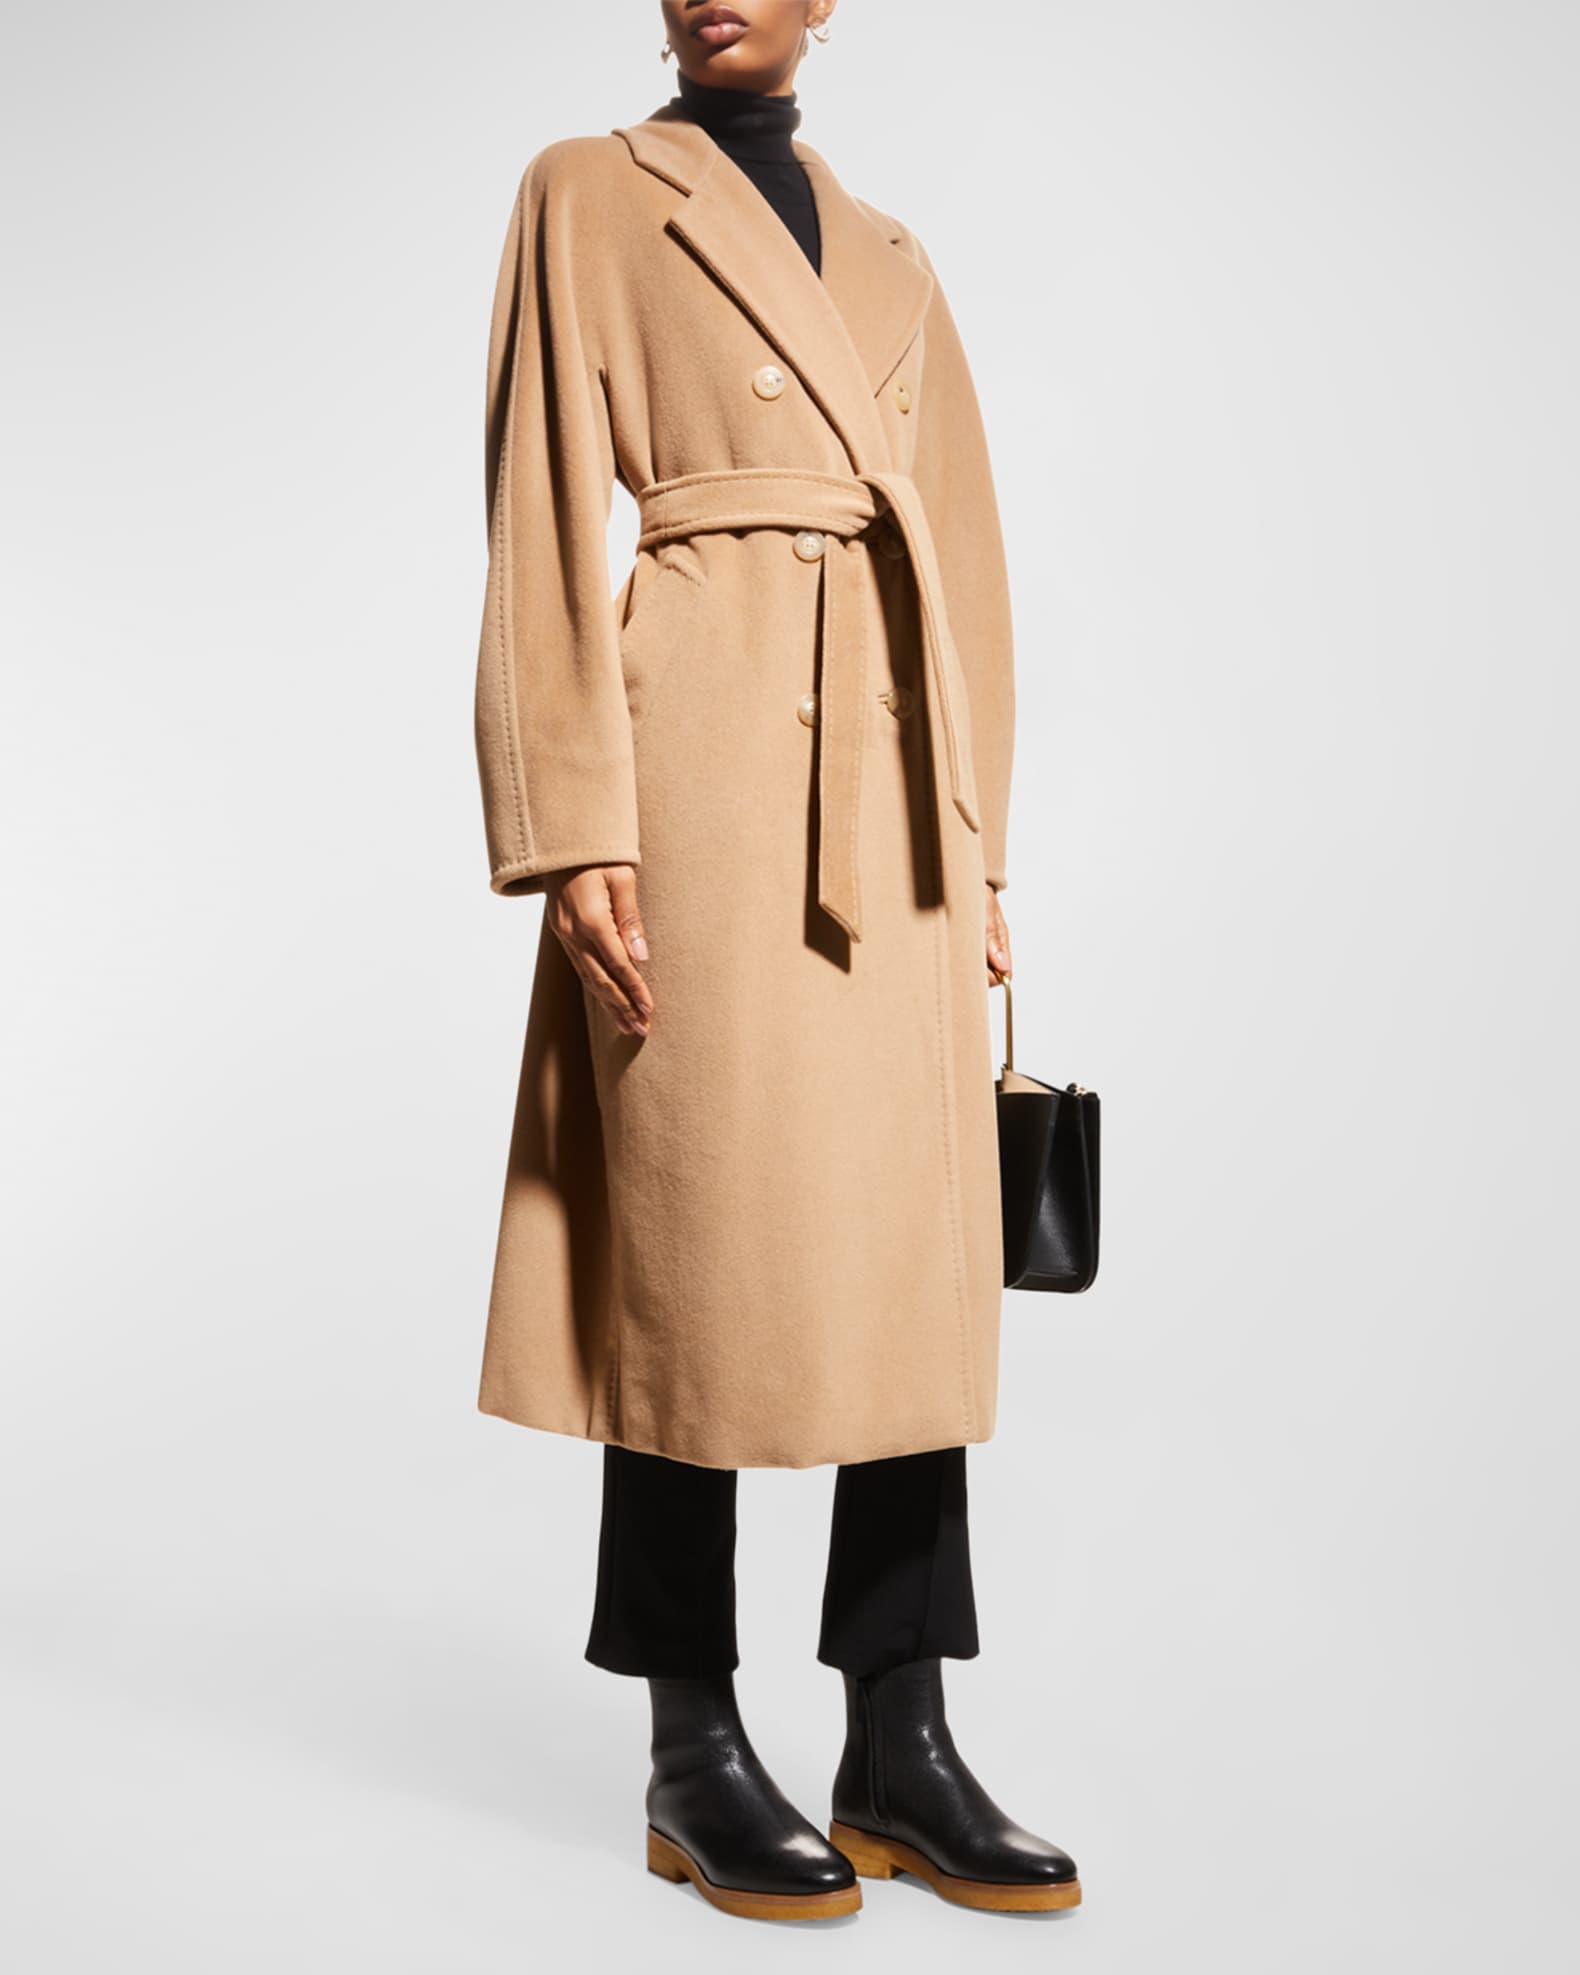 Max Mara Wool-Cashmere Double-Breasted Madame Coat Neiman Marcus